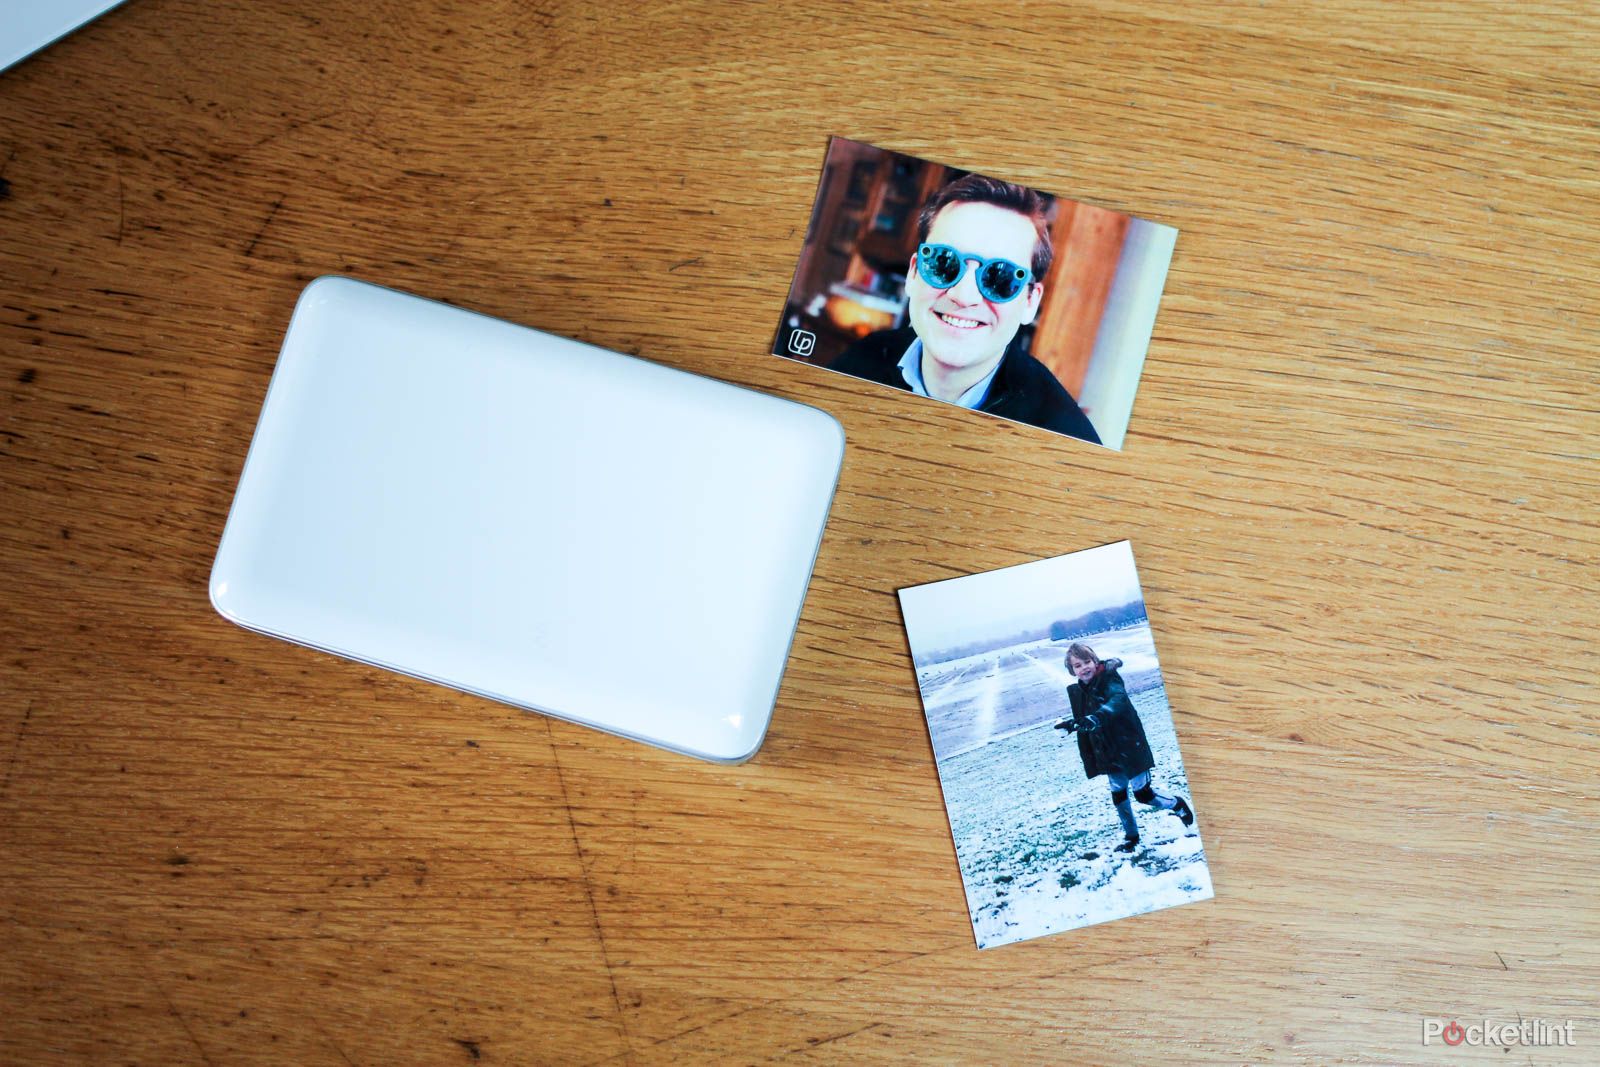 Lifeprint Photo and Video Printer tested Augmented Reality prints let you recreate Harry Potter-like photos image 3